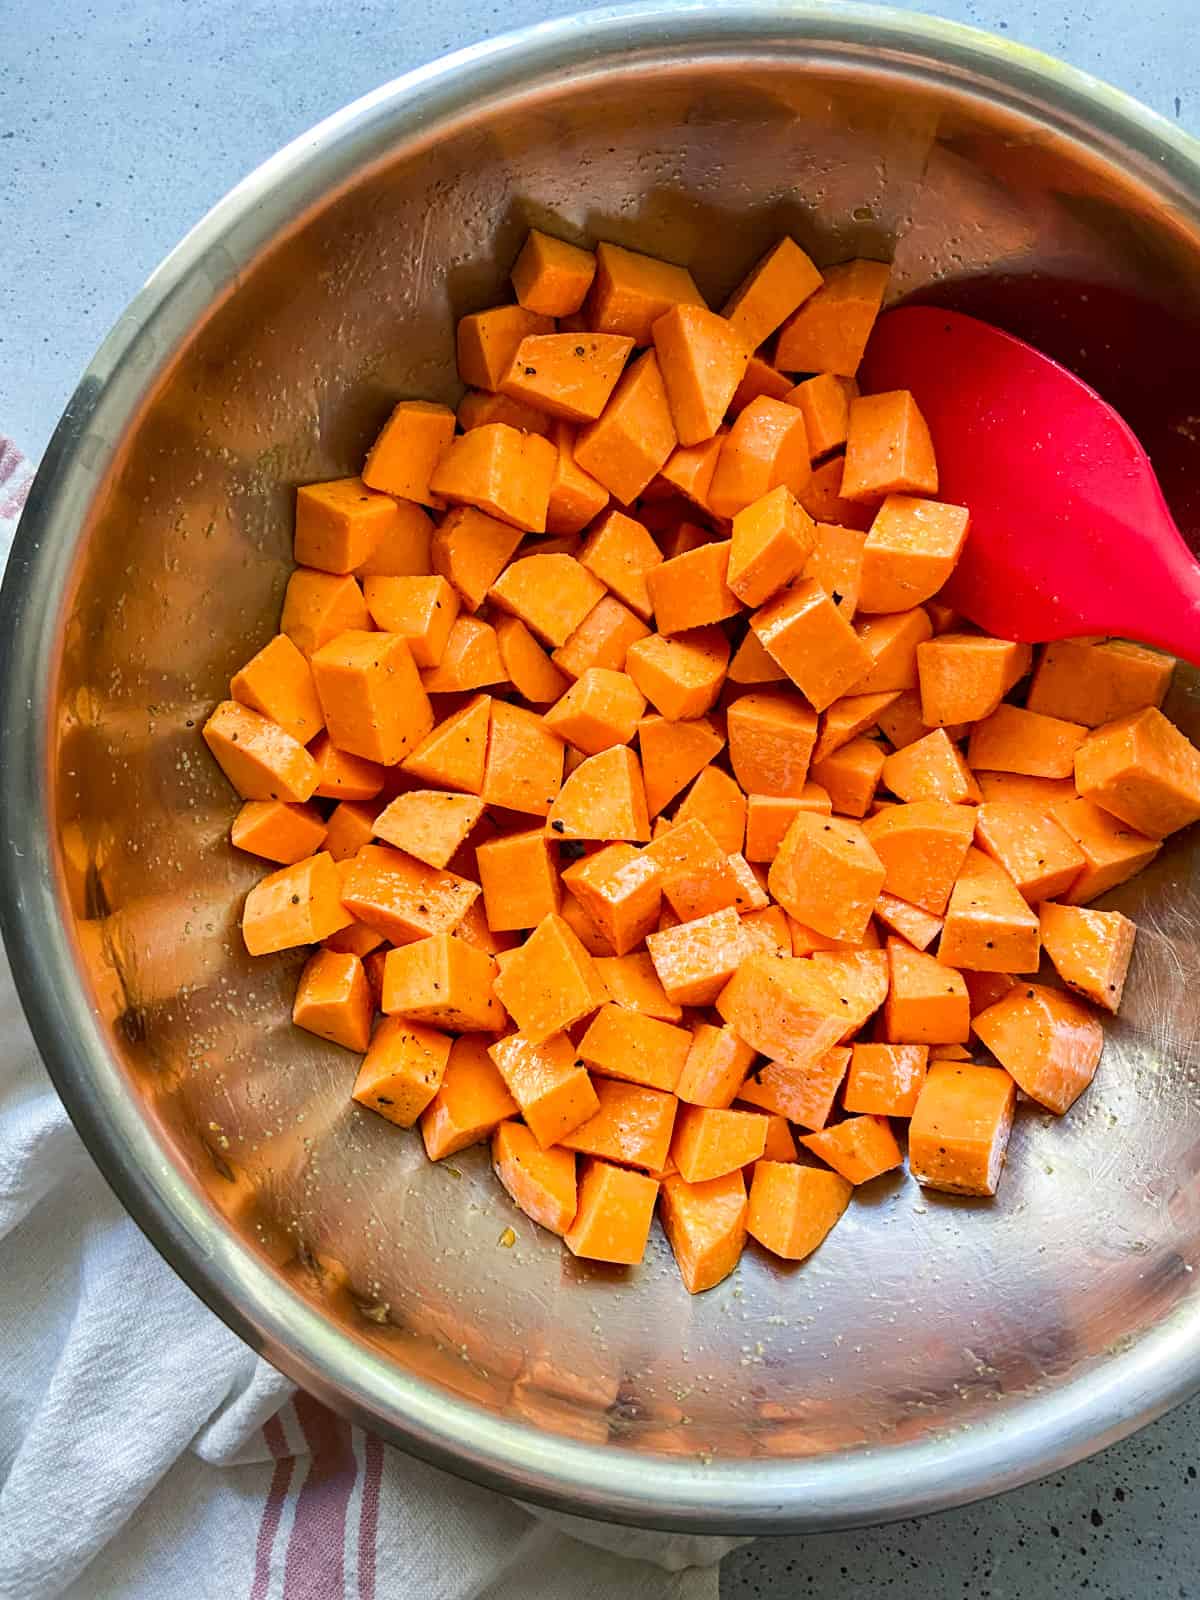 Raw diced sweet potatoes coated in olive oil in a bowl.